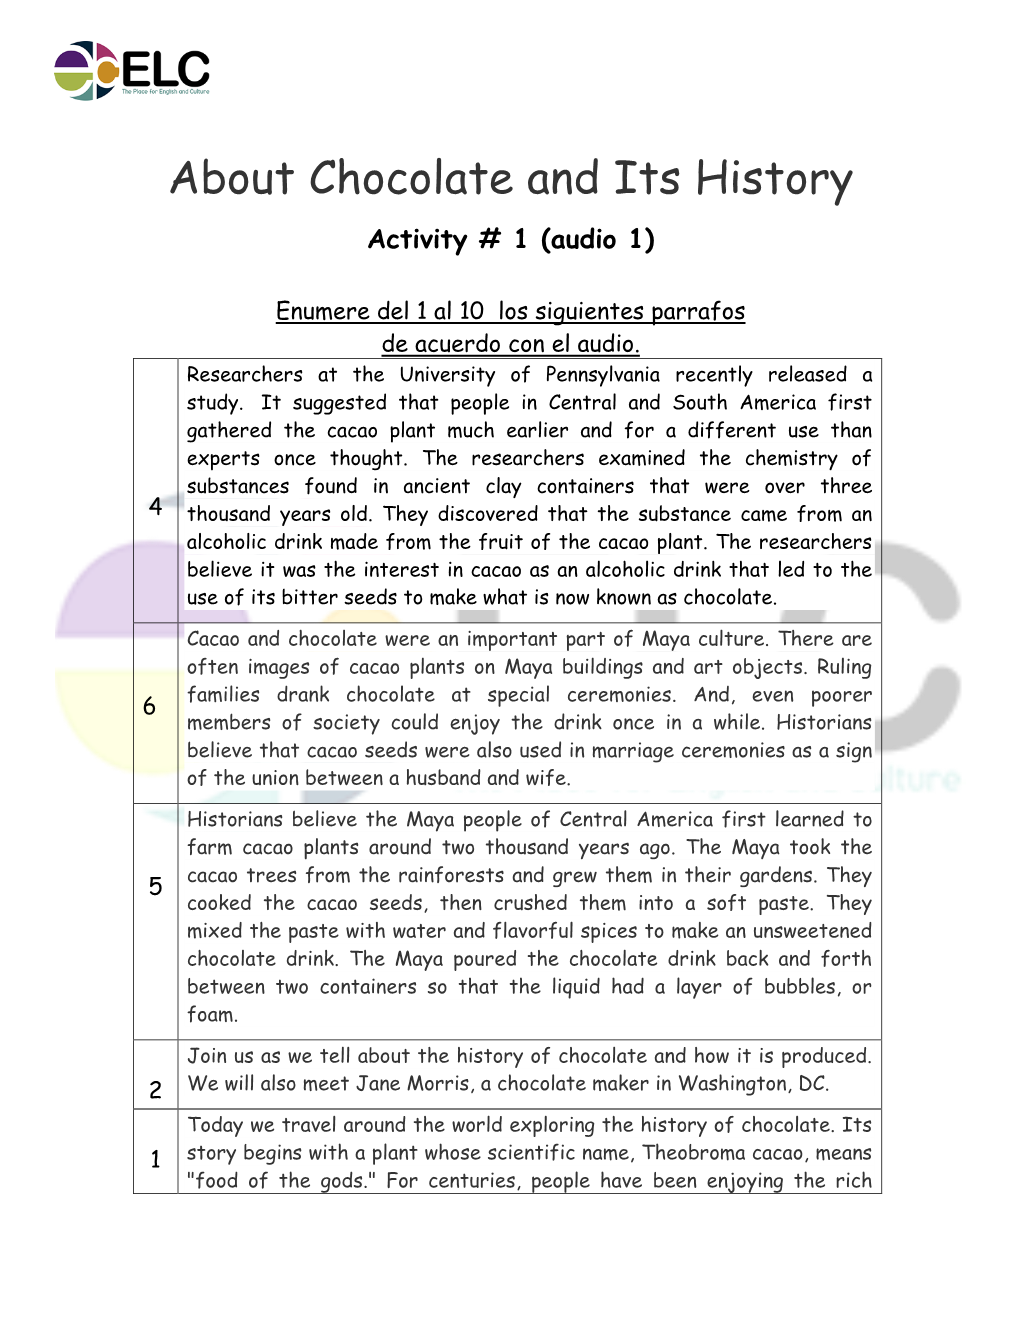 About Chocolate and Its History Activity # 1 (Audio 1)